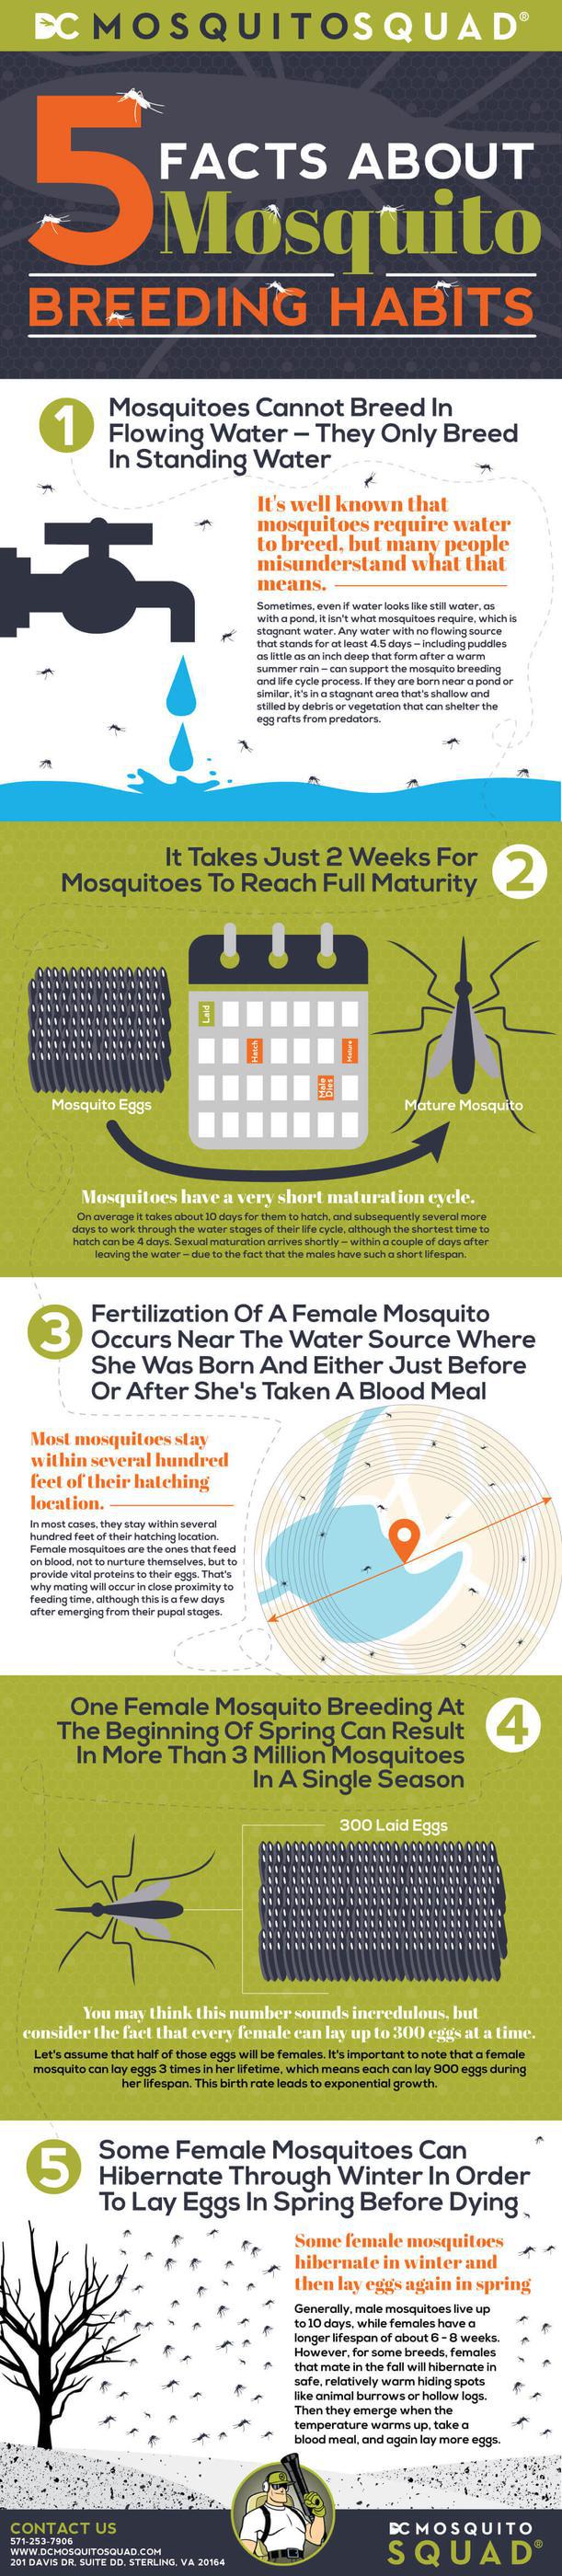 Infographic: 5 Facts About Mosquito Breeding Habits